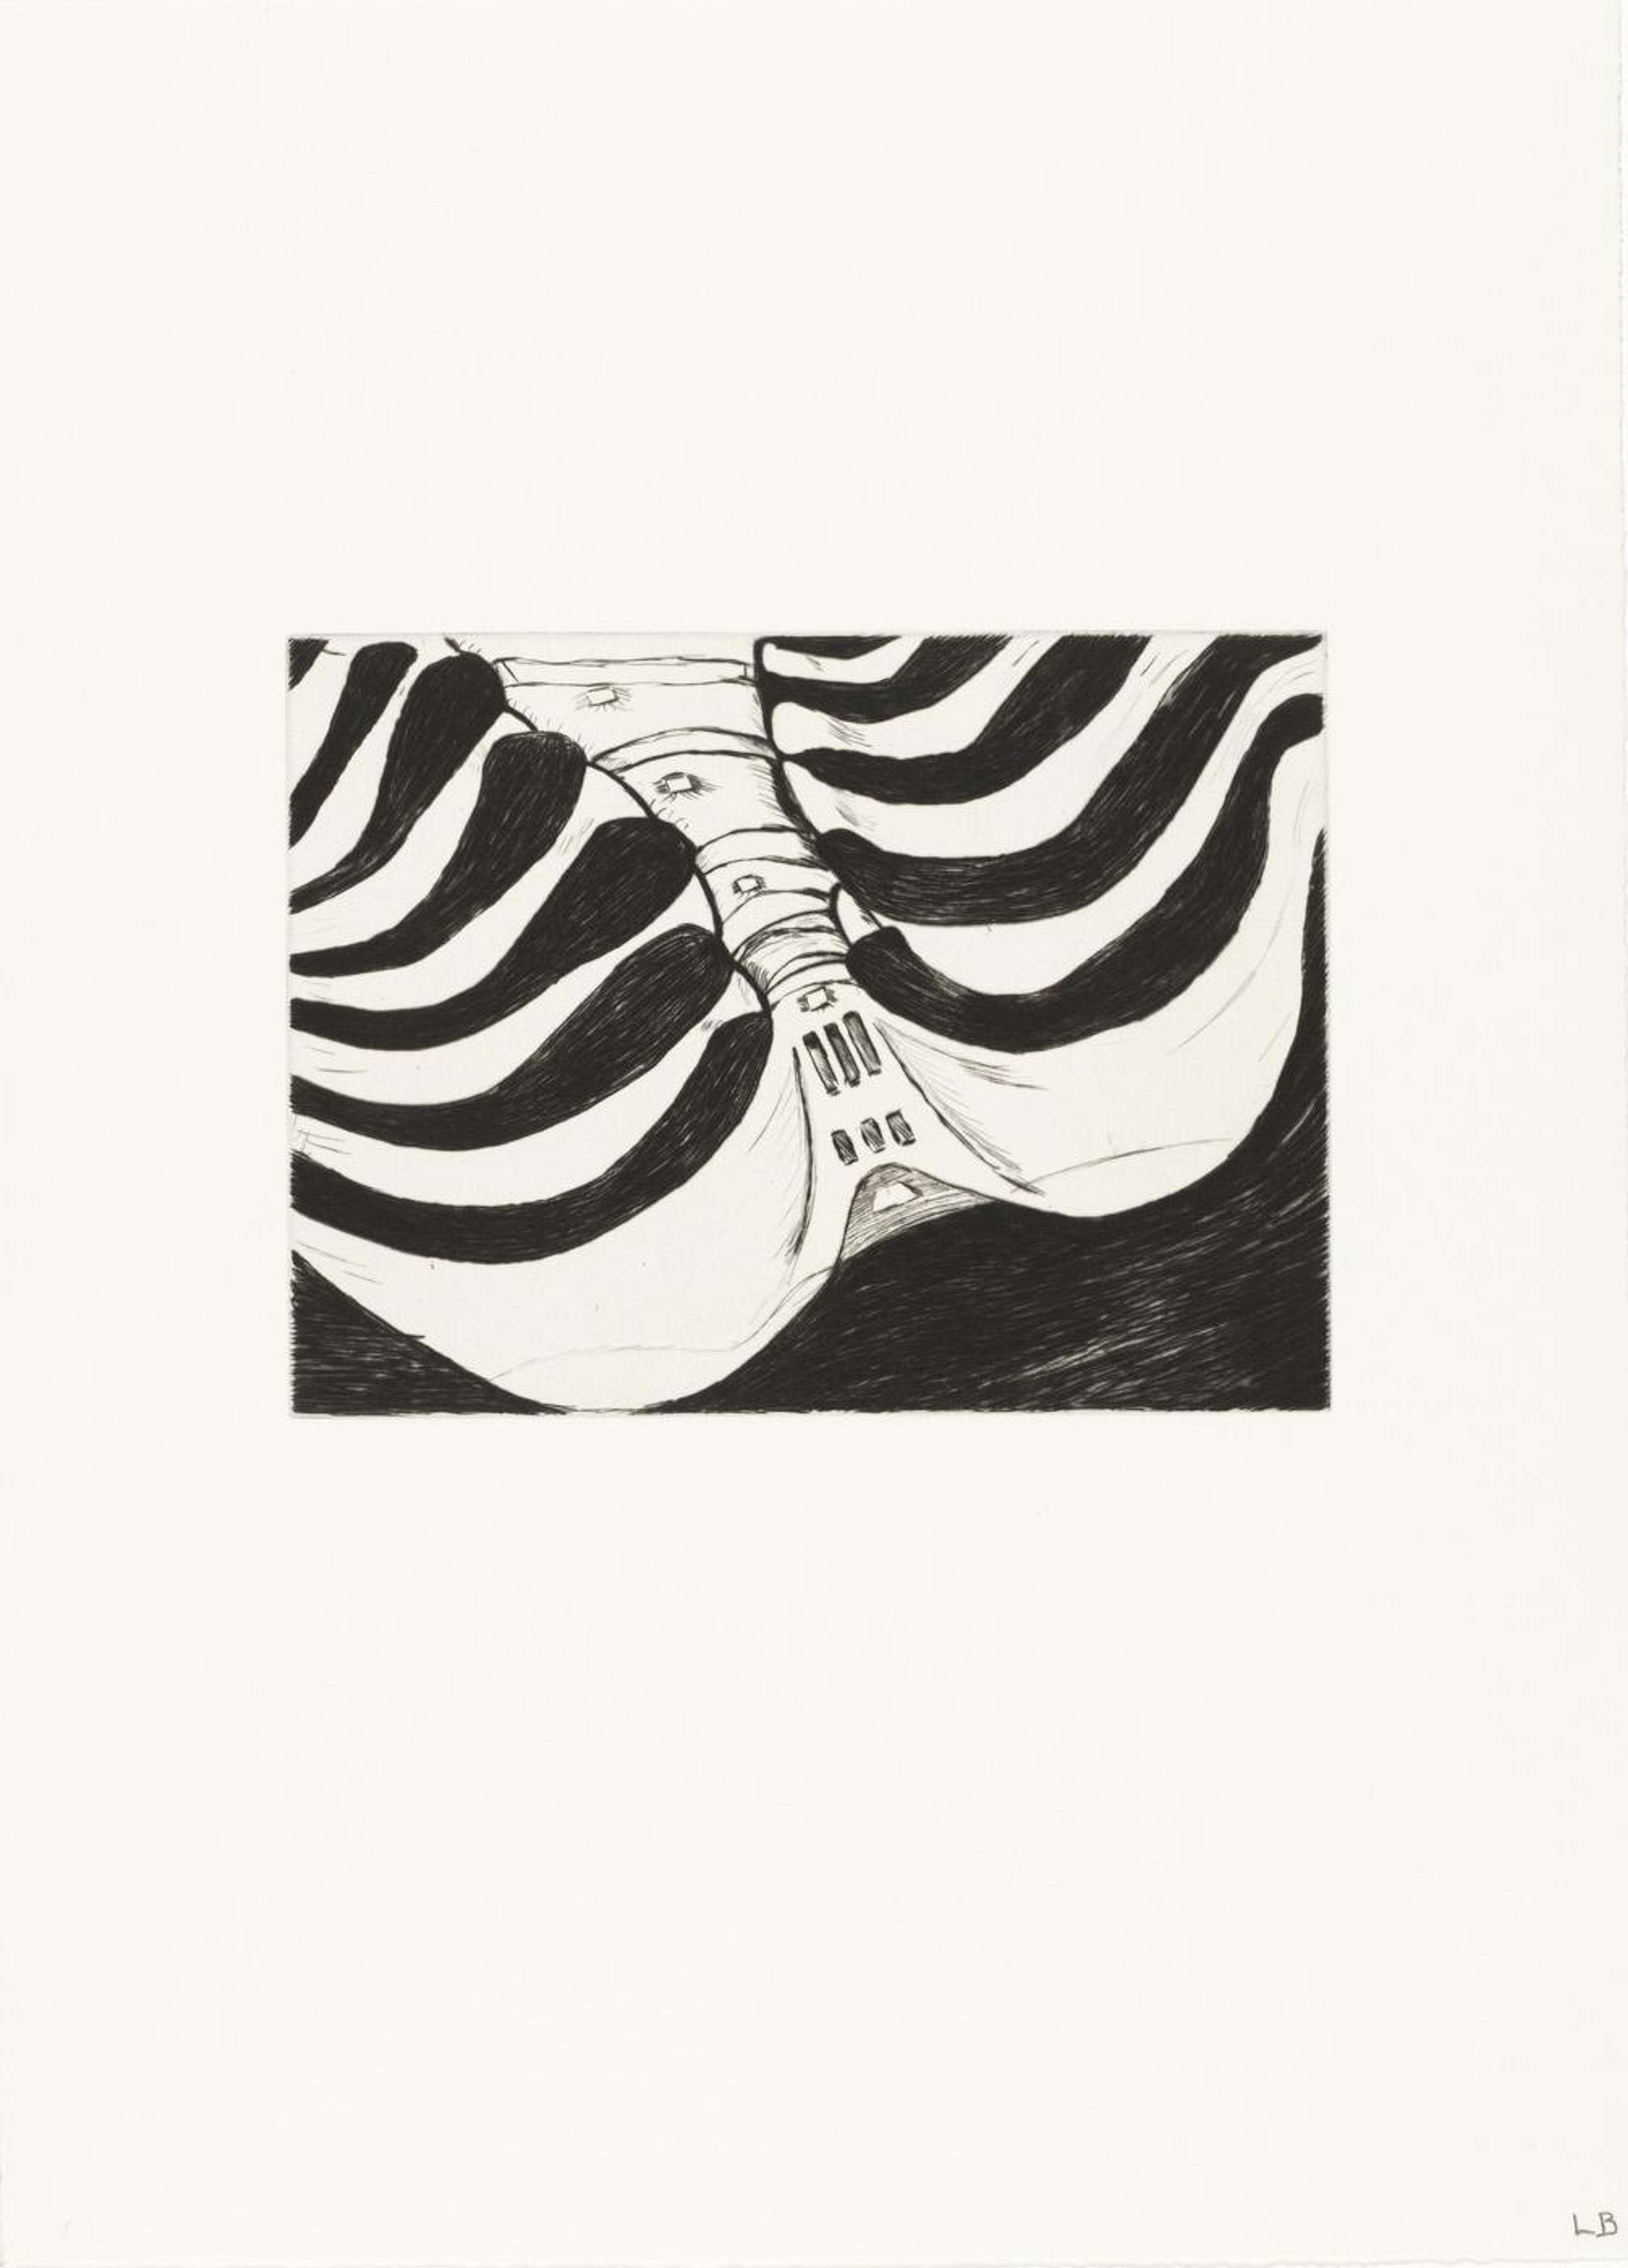 This monochrome print by Bourgeois shows a human pelvis, abstracted almost to the point of unrecognition.